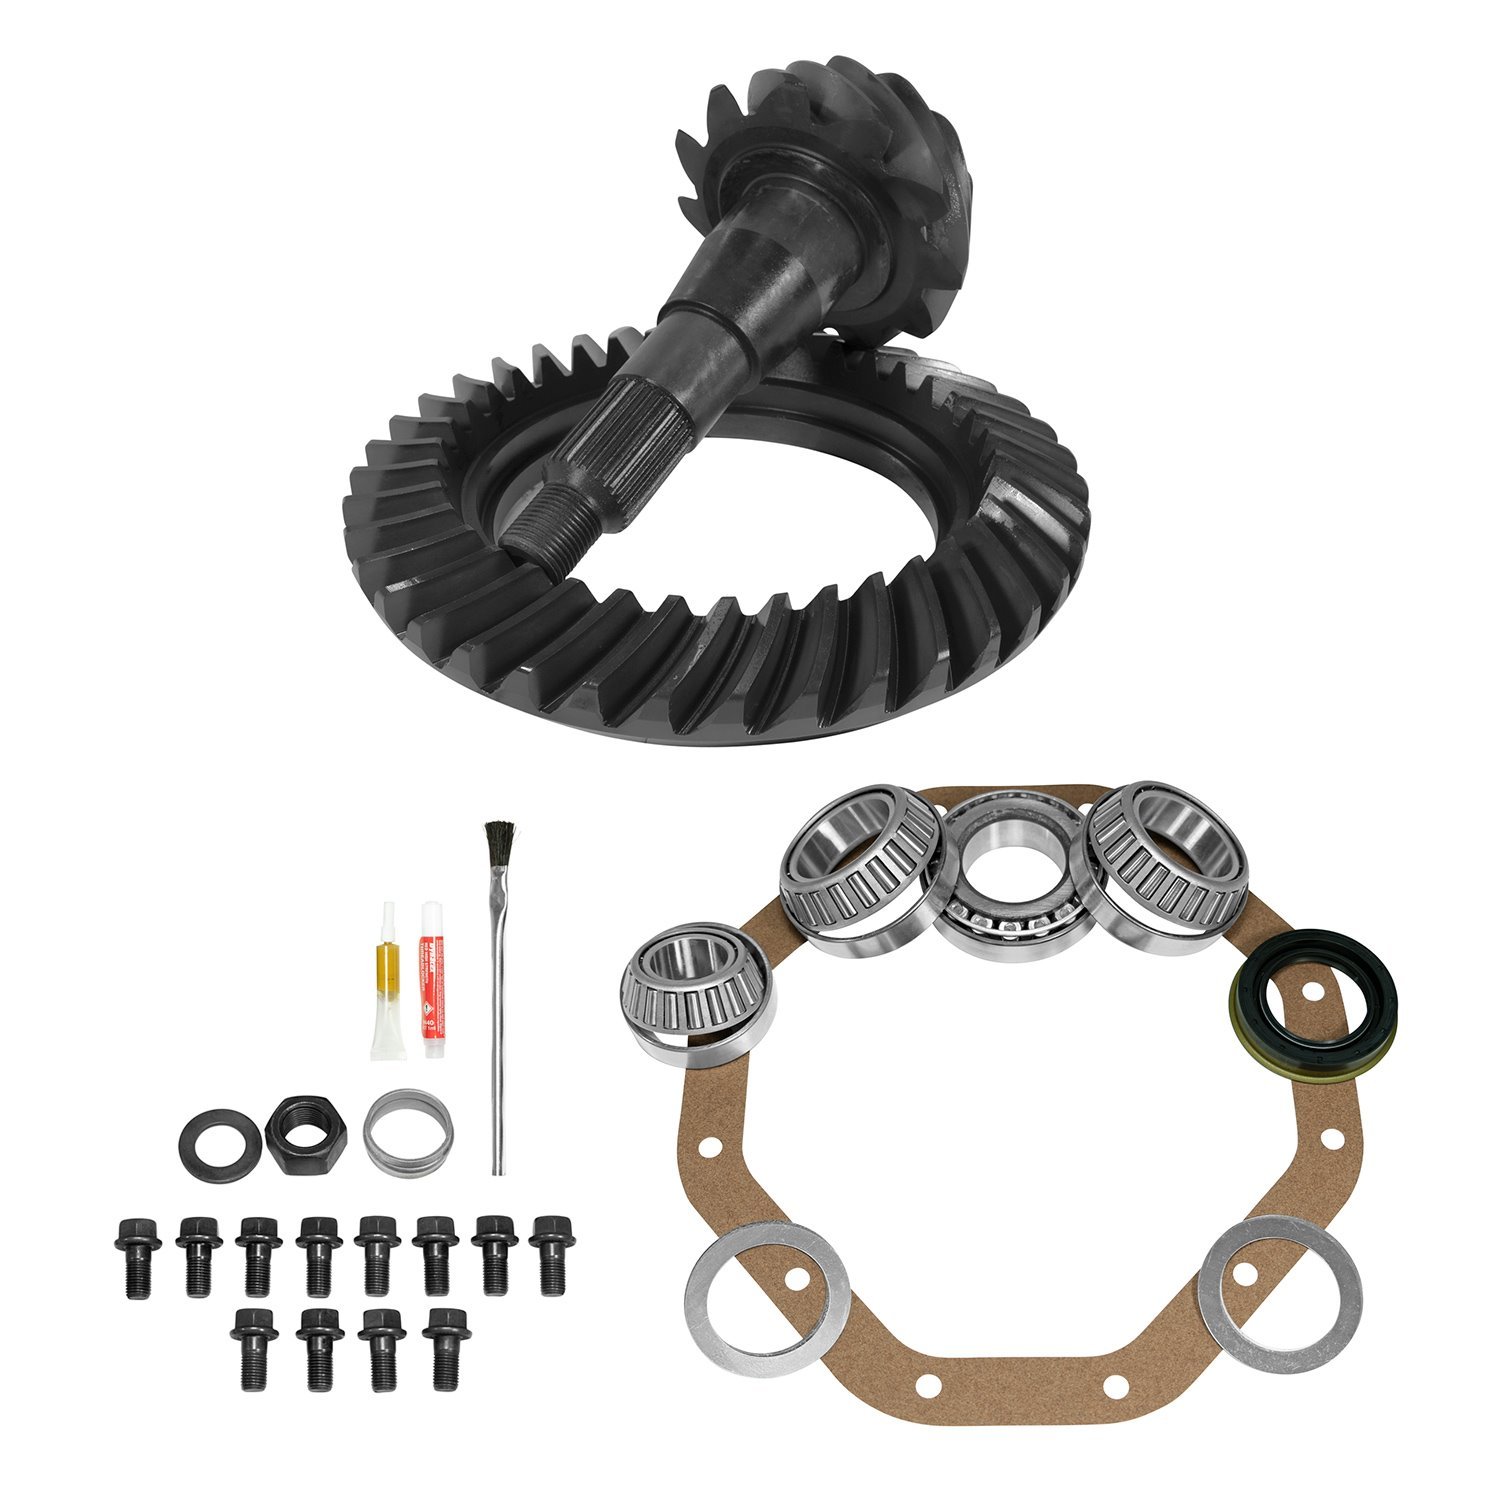 C925B1004 Ring & Pinion w/Installation Kit Bundle for 1966-2010 Chrysler Vehicles 9.25 Differentials [3.55 Ratio]